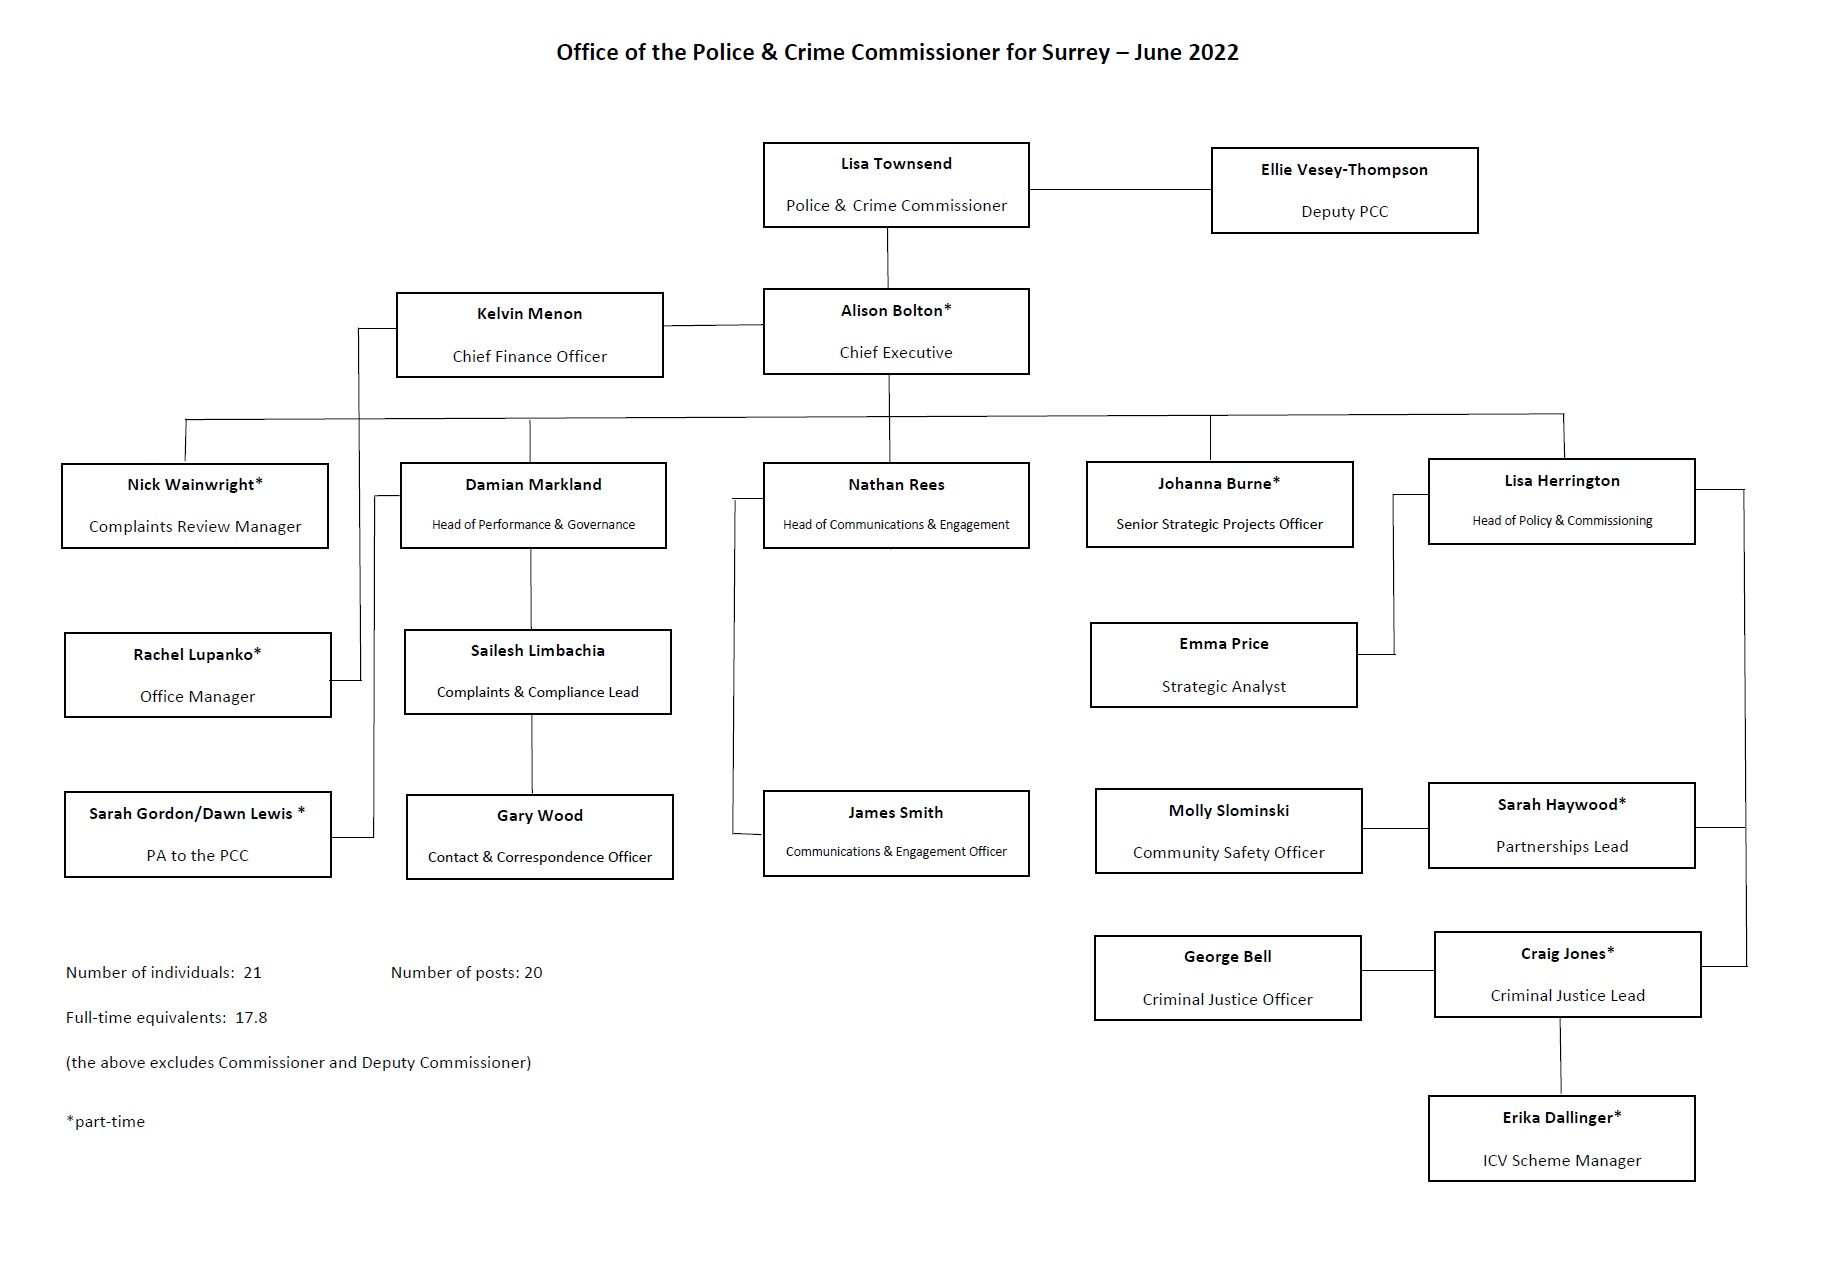 Office of the Police and Crime Commissioner for Surrey Structure Chart June 2022